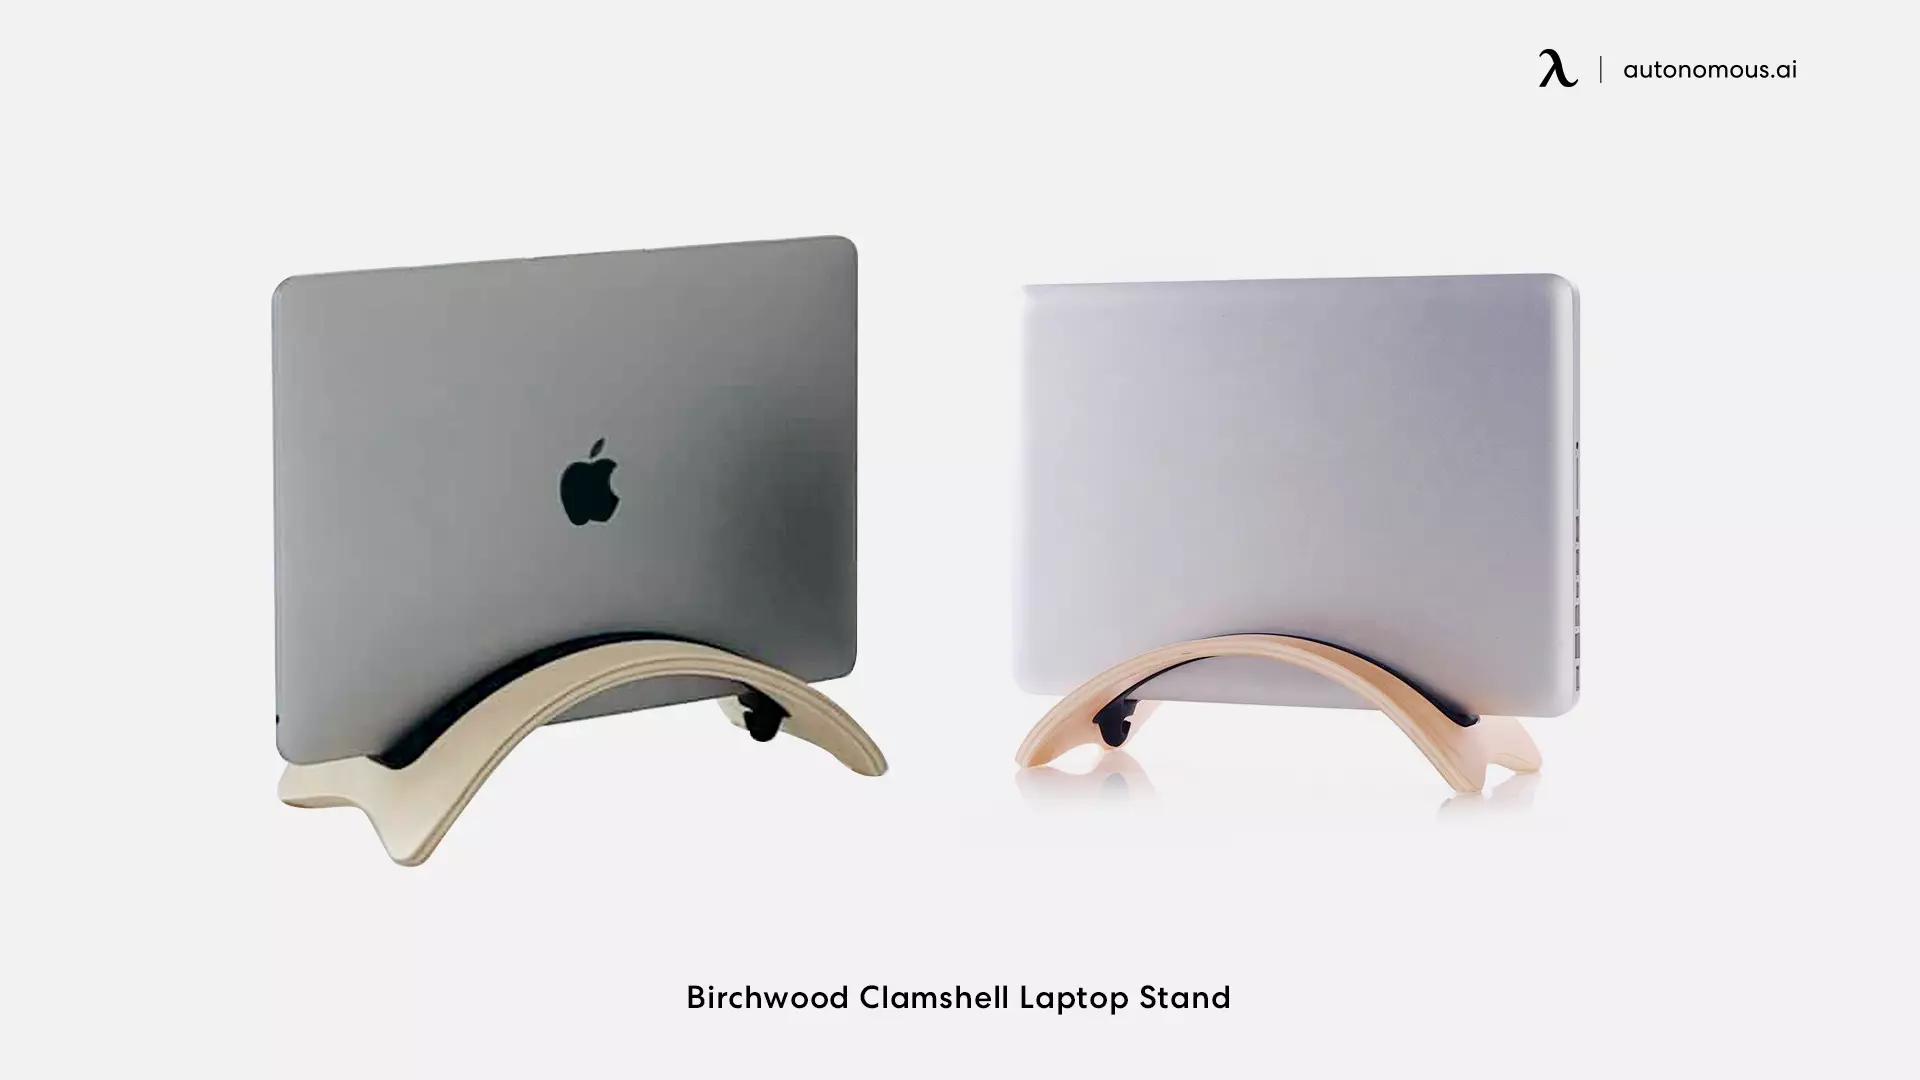 Birchwood Clamshell Laptop Stand industrial desk accessories